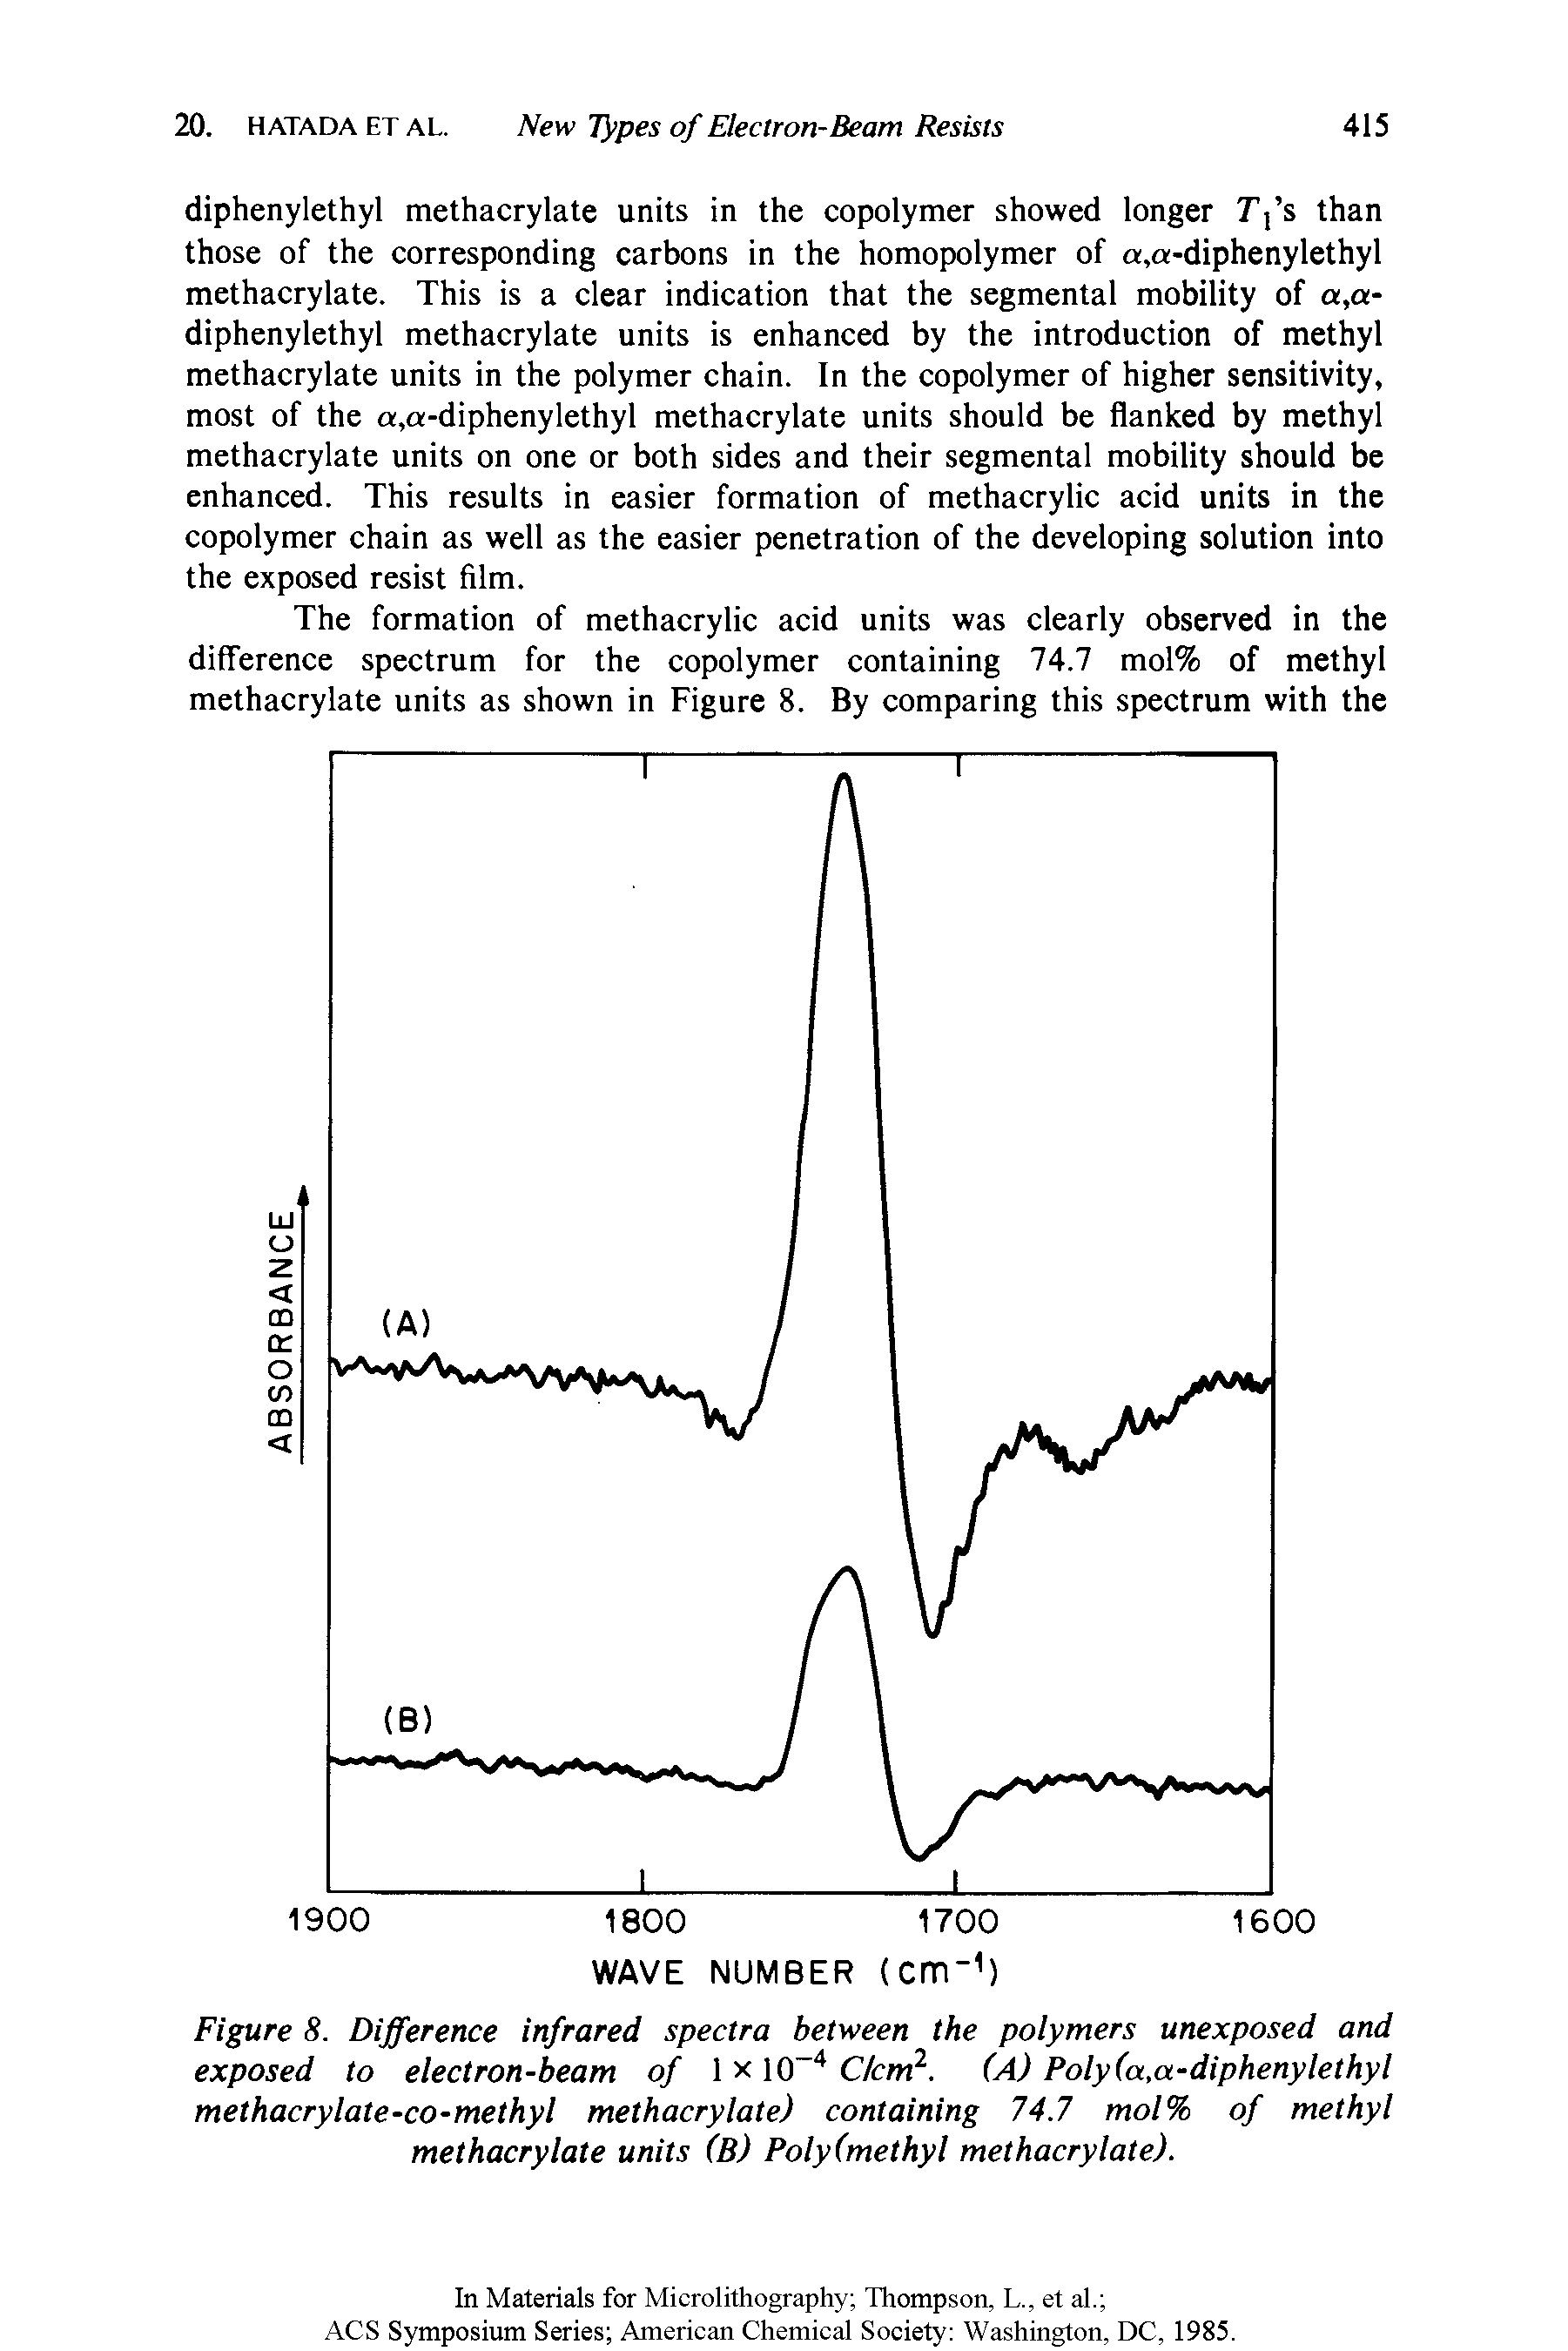 Figure 8. Difference infrared spectra between the polymers unexposed and exposed to electron-beam of 1 x 10 4 C/cm2. (A) Poly(a,a-diphenylethyl methacrylate-co-methyl methacrylate) containing 74.7 mol% of methyl methacrylate units (B) Poly (methyl methacrylate).